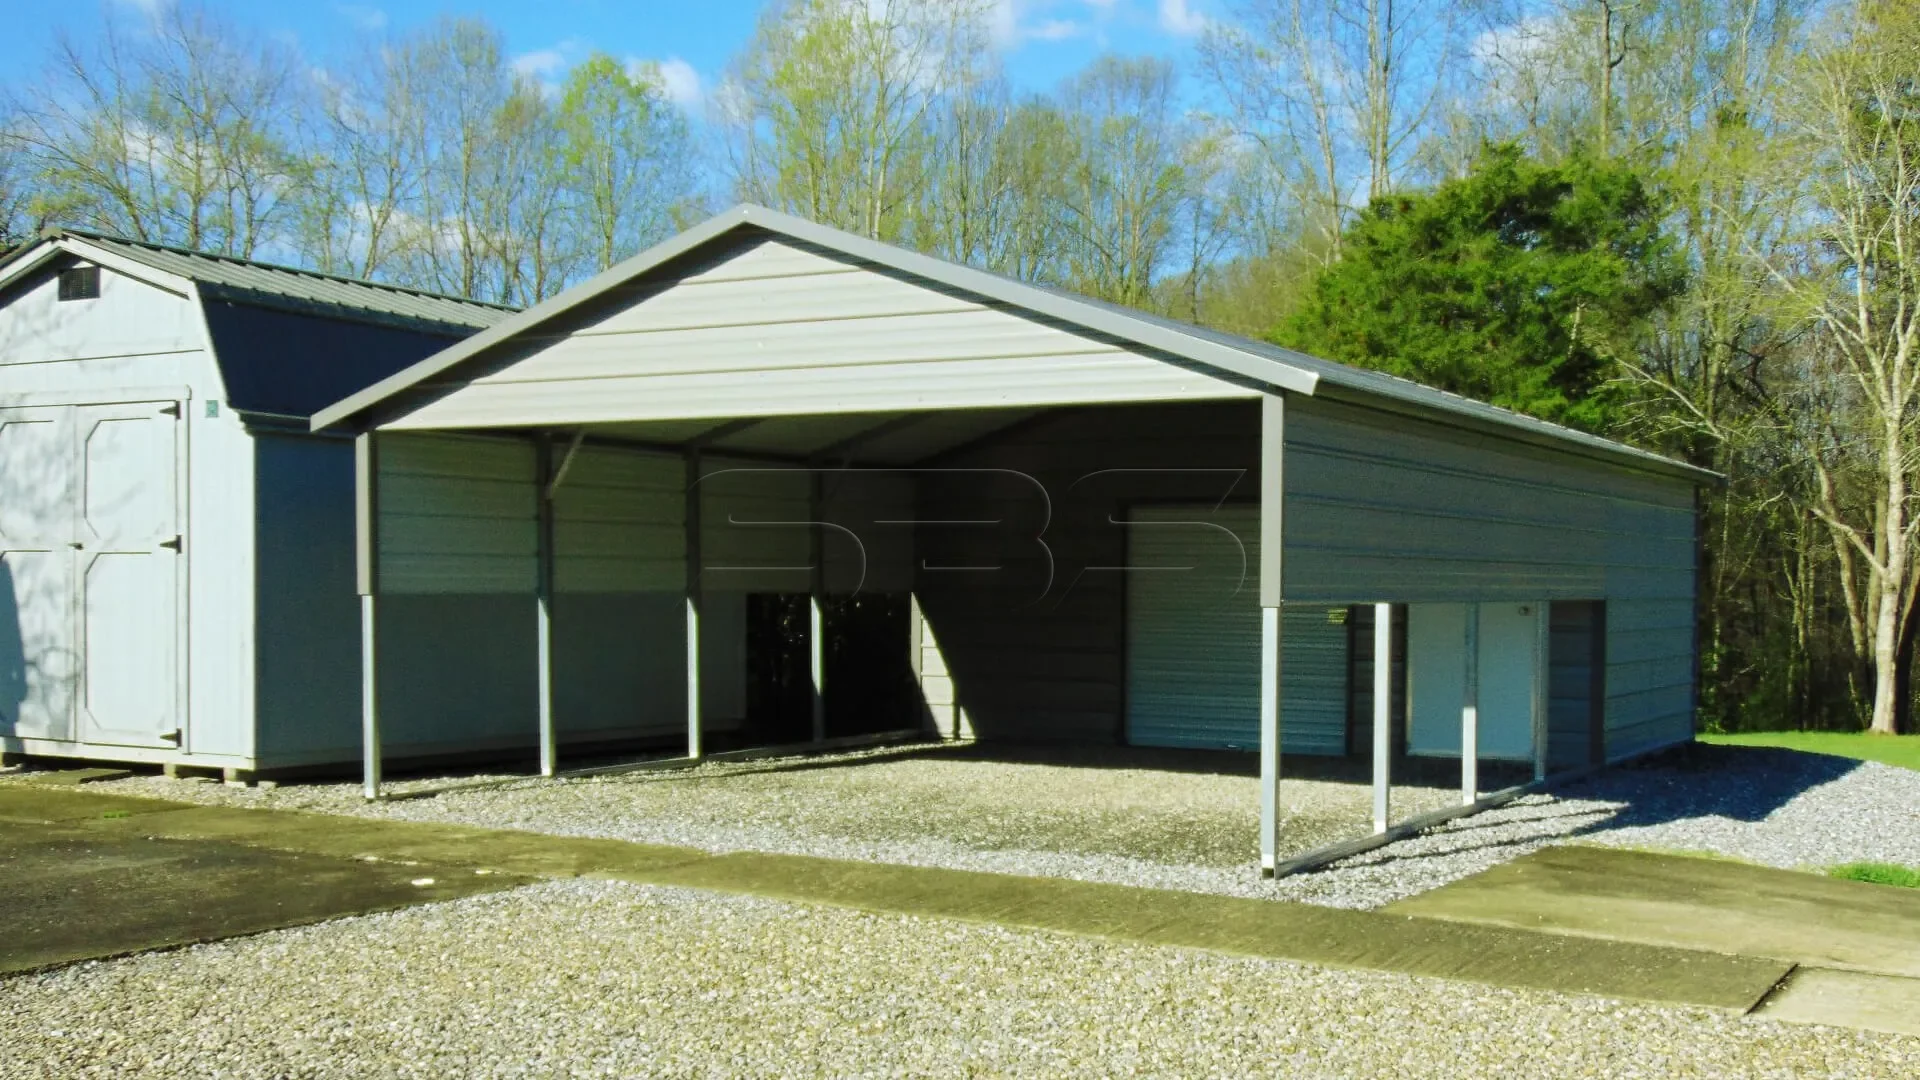 Boxed eave metal carport with storage room